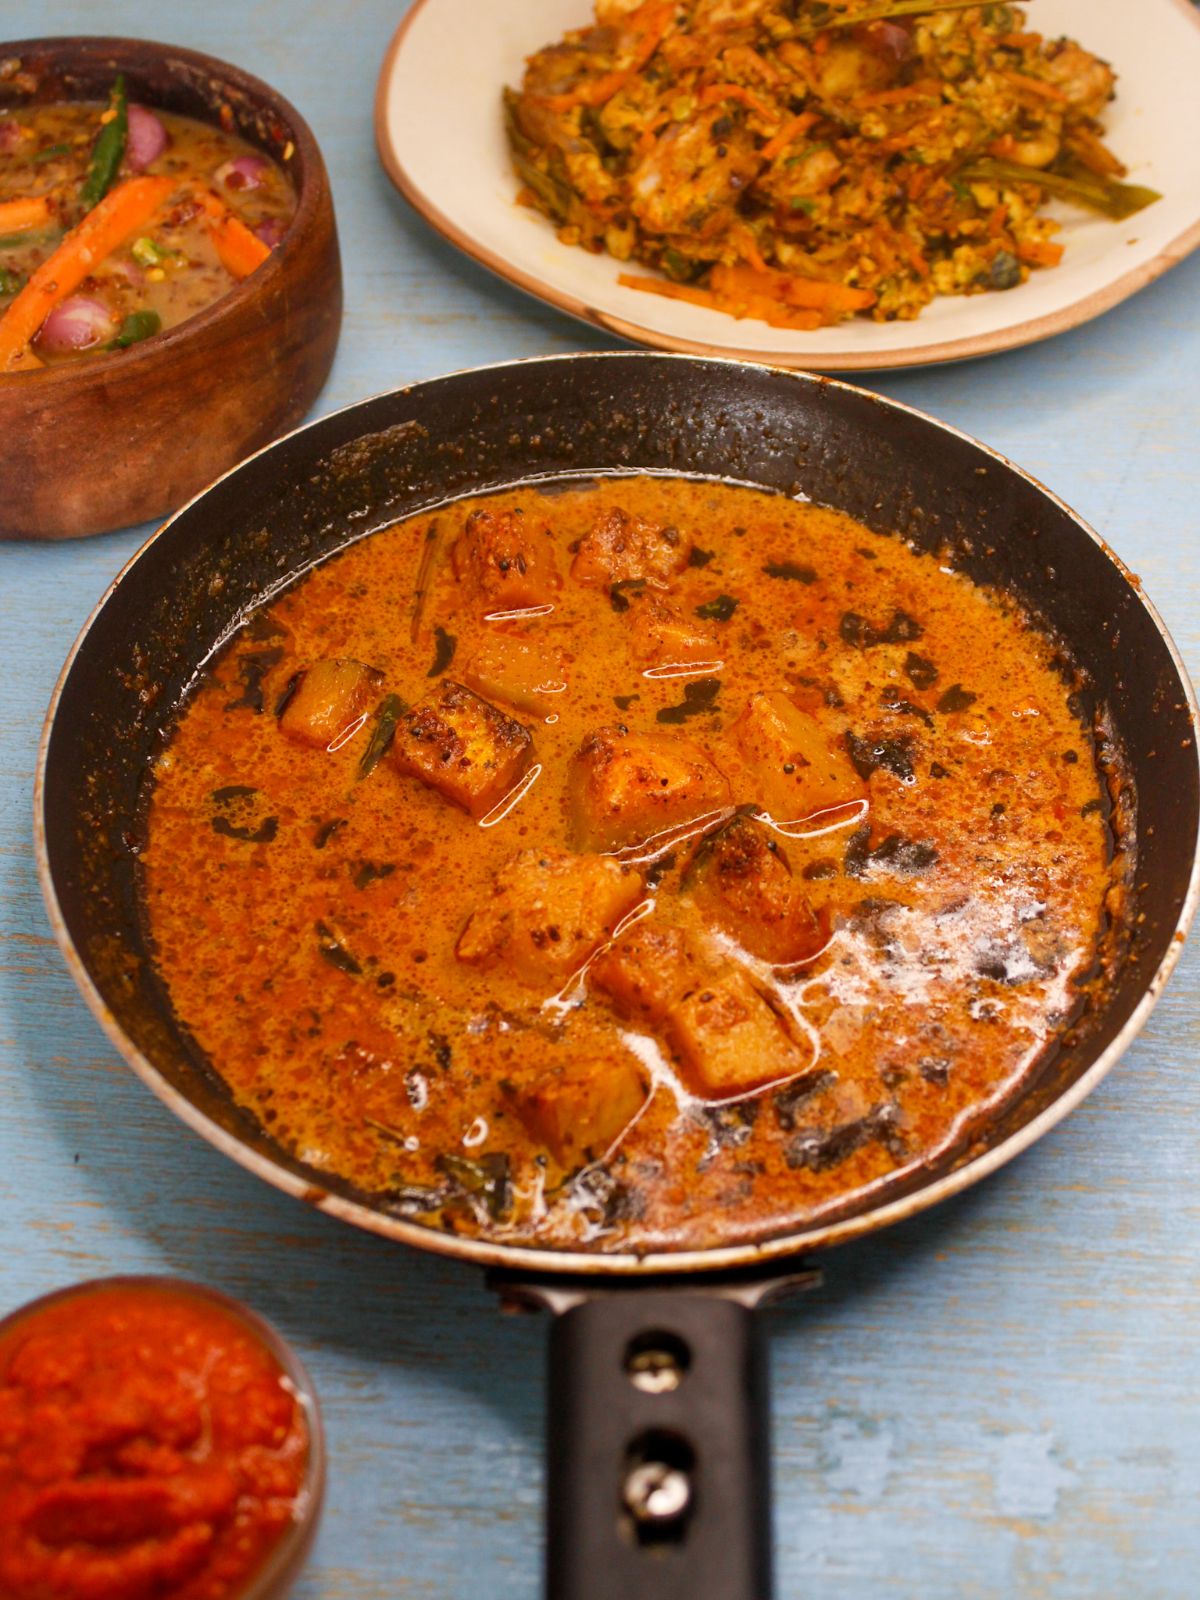 Sri Lankan Pumpkin Curry served with chili paste